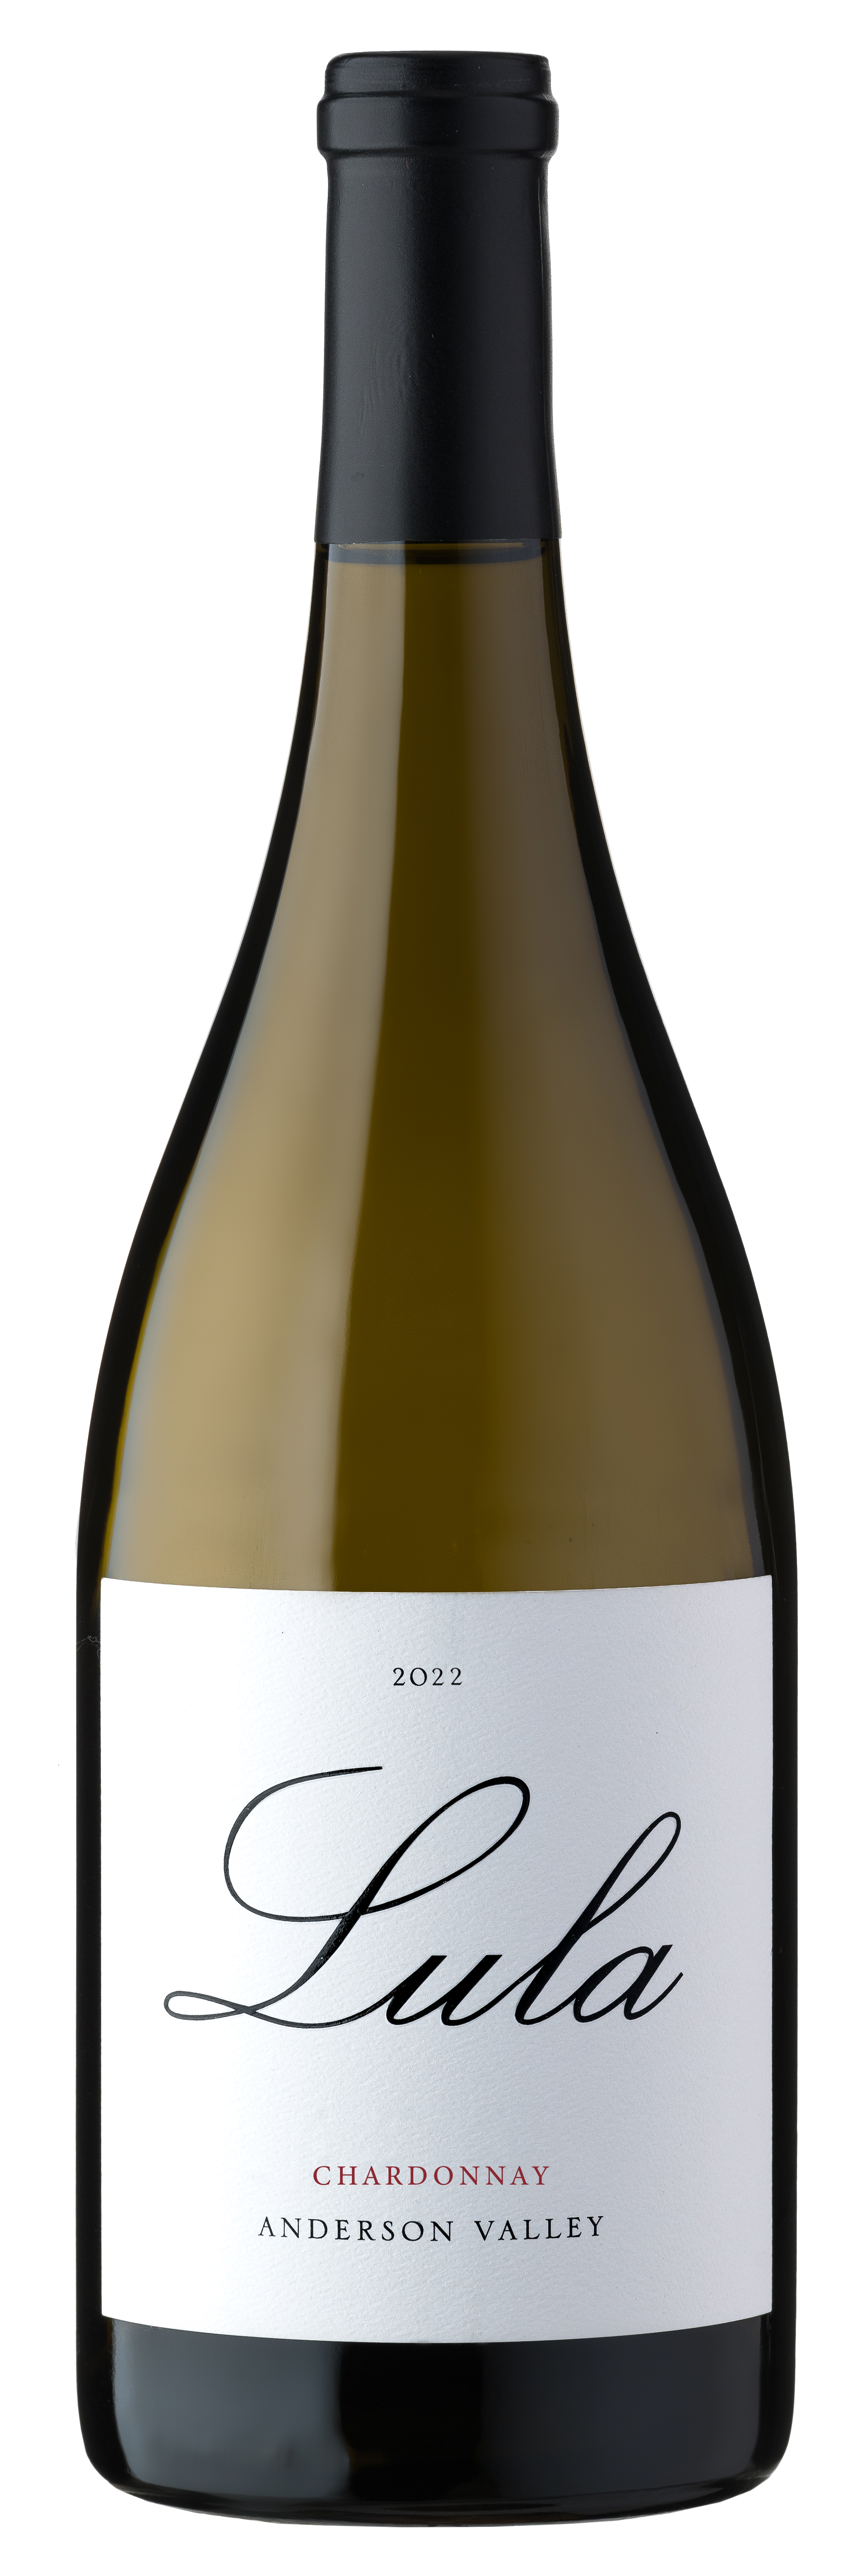 Product Image for 2022 Anderson Valley Chardonnay